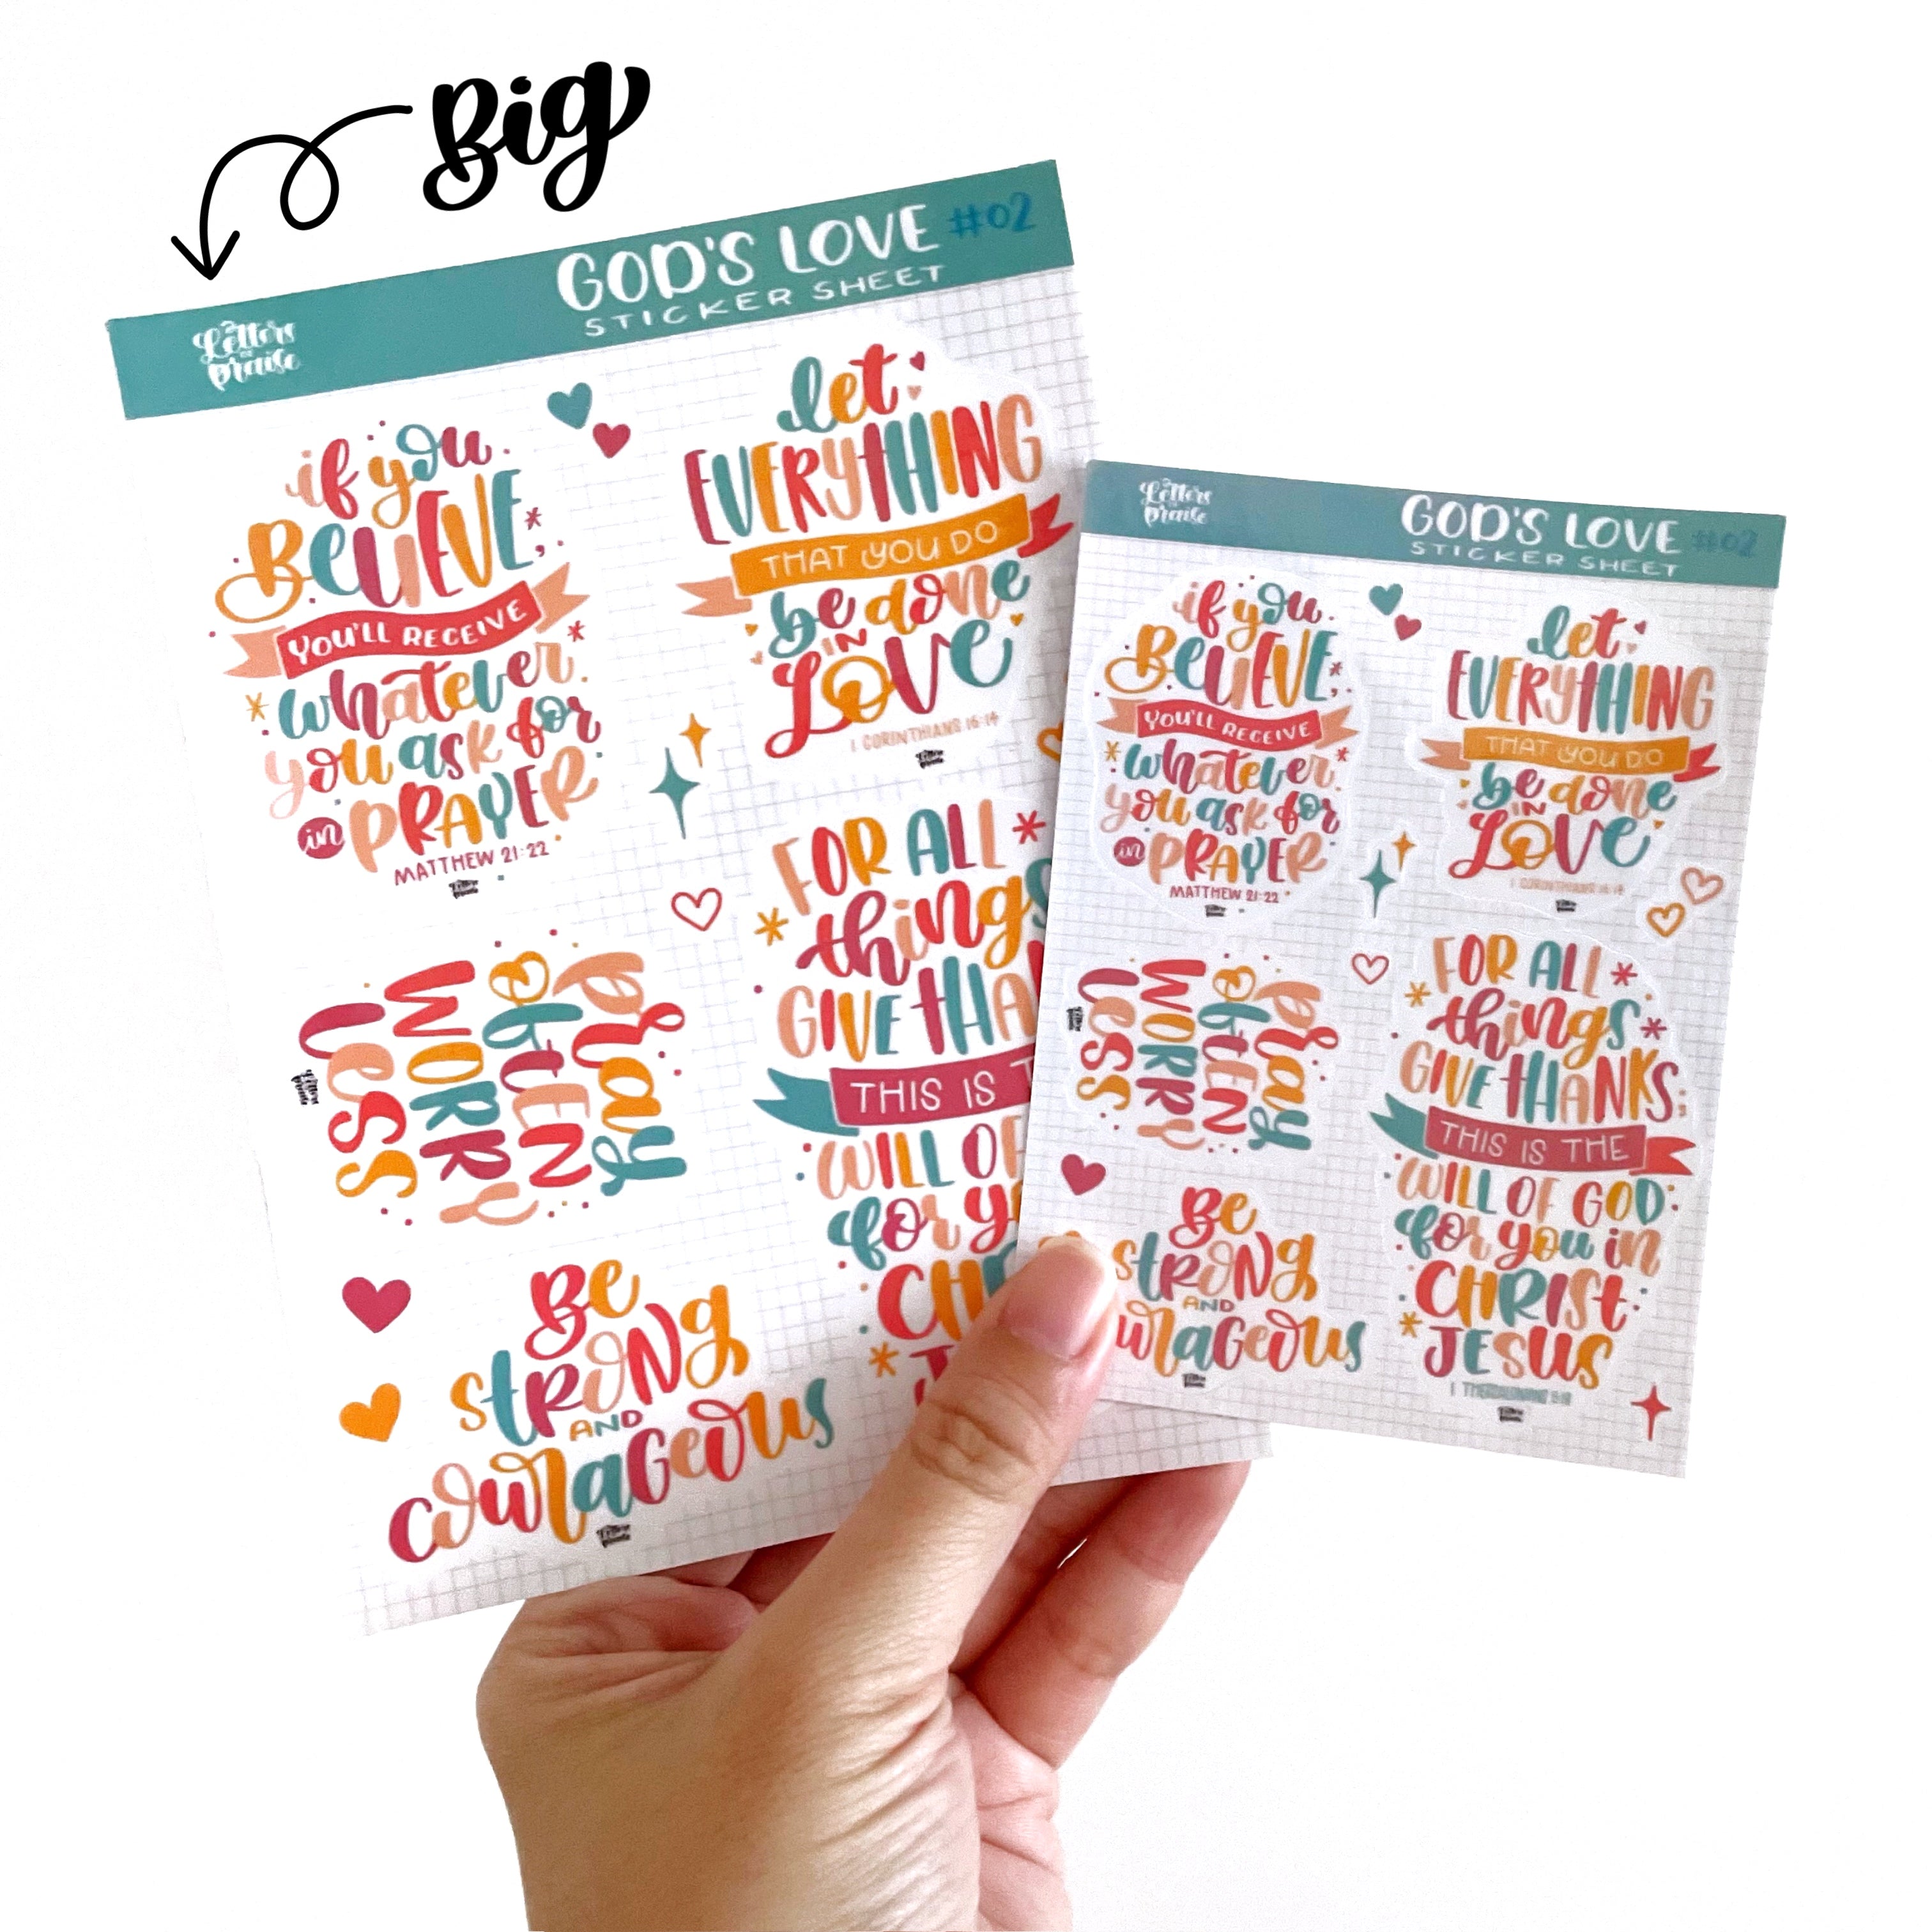 God’s Love #02 Christian Sticker Sheet for Bible Journaling, Bullet  Journalling and decorating (Waterproof, Holographic)